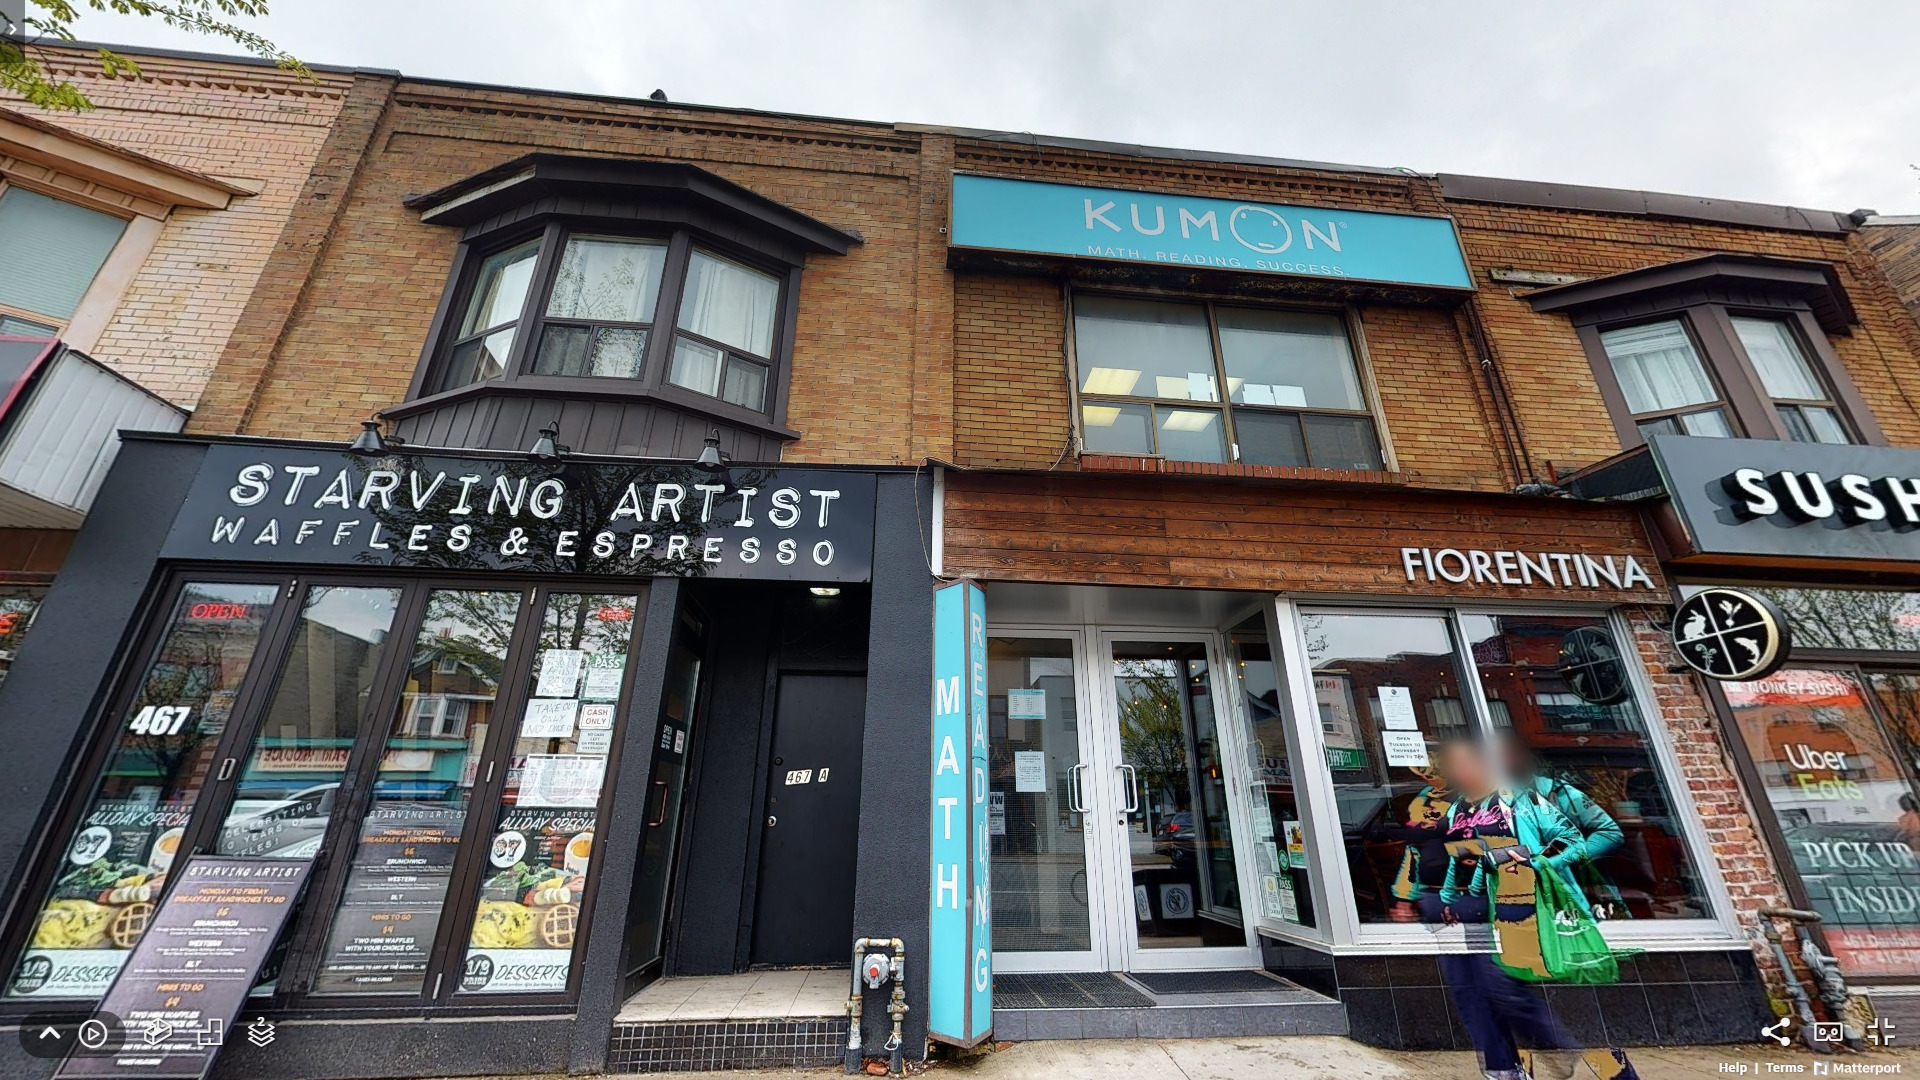 463 Danforth Ave facade with Fiorentina restaurant and Kumon.